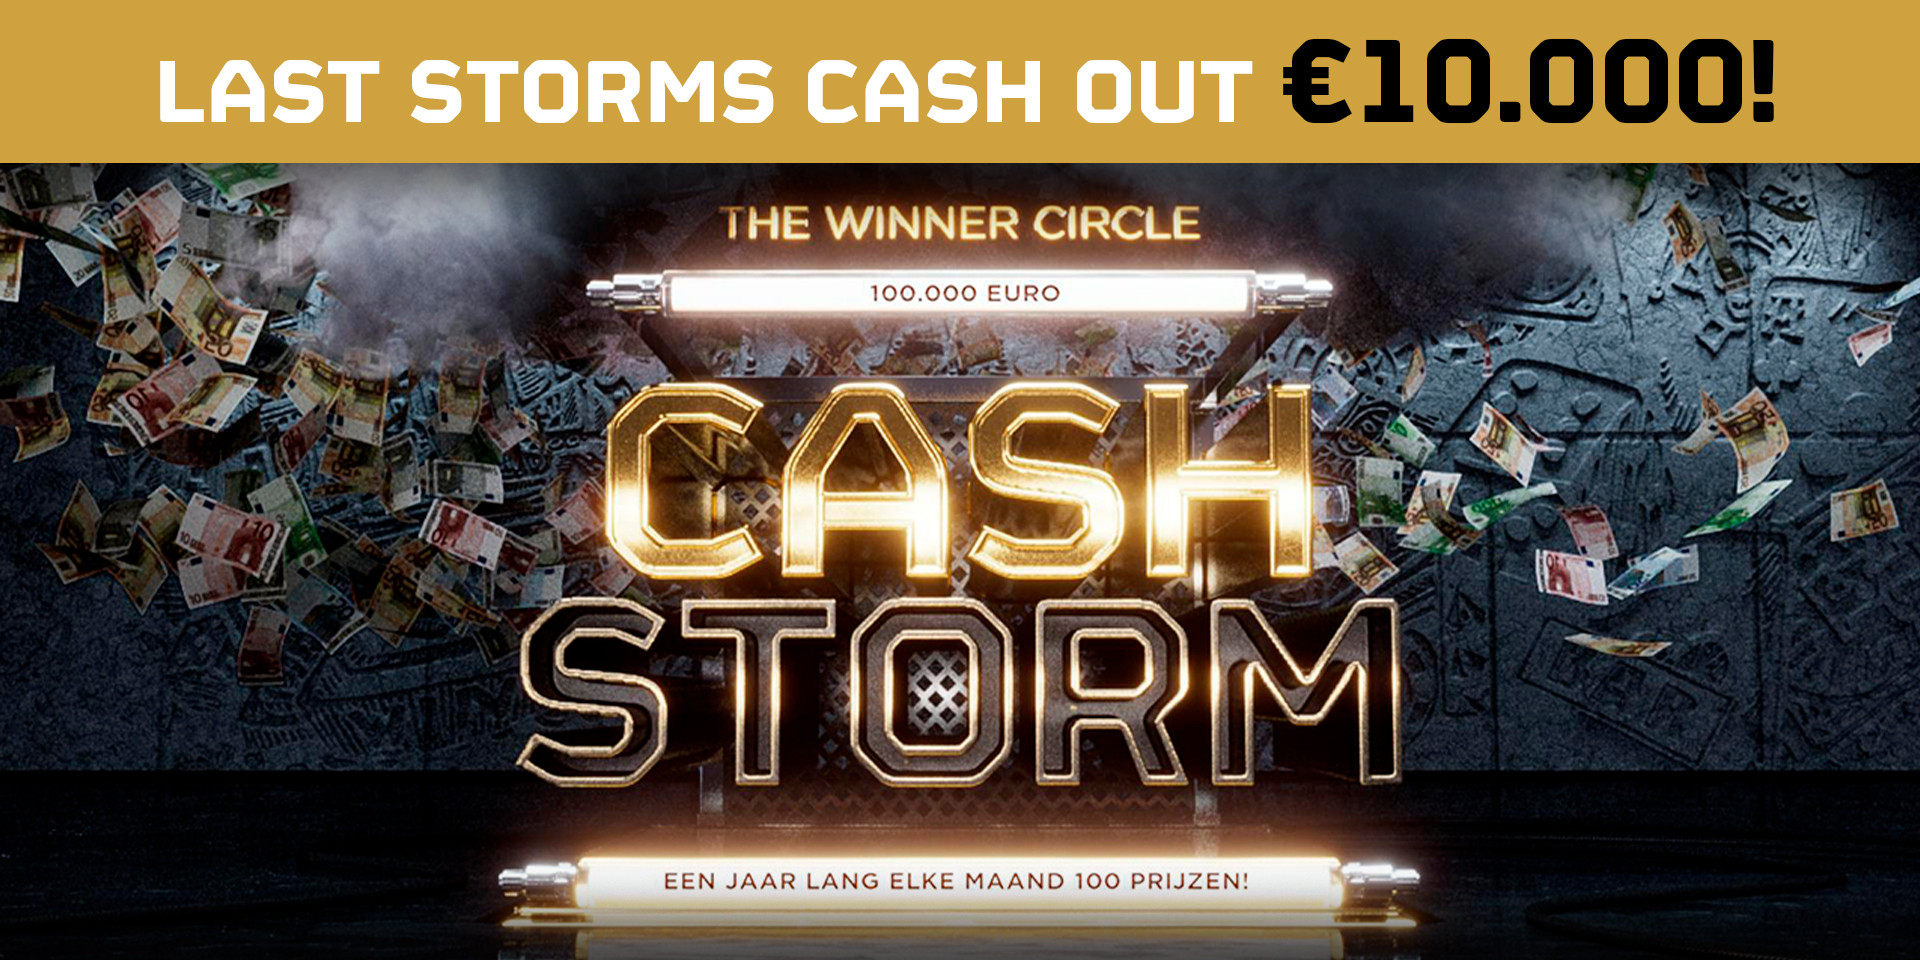 ARE YOU ONE OF THE 100 WINNERS THIS CASH STORM?